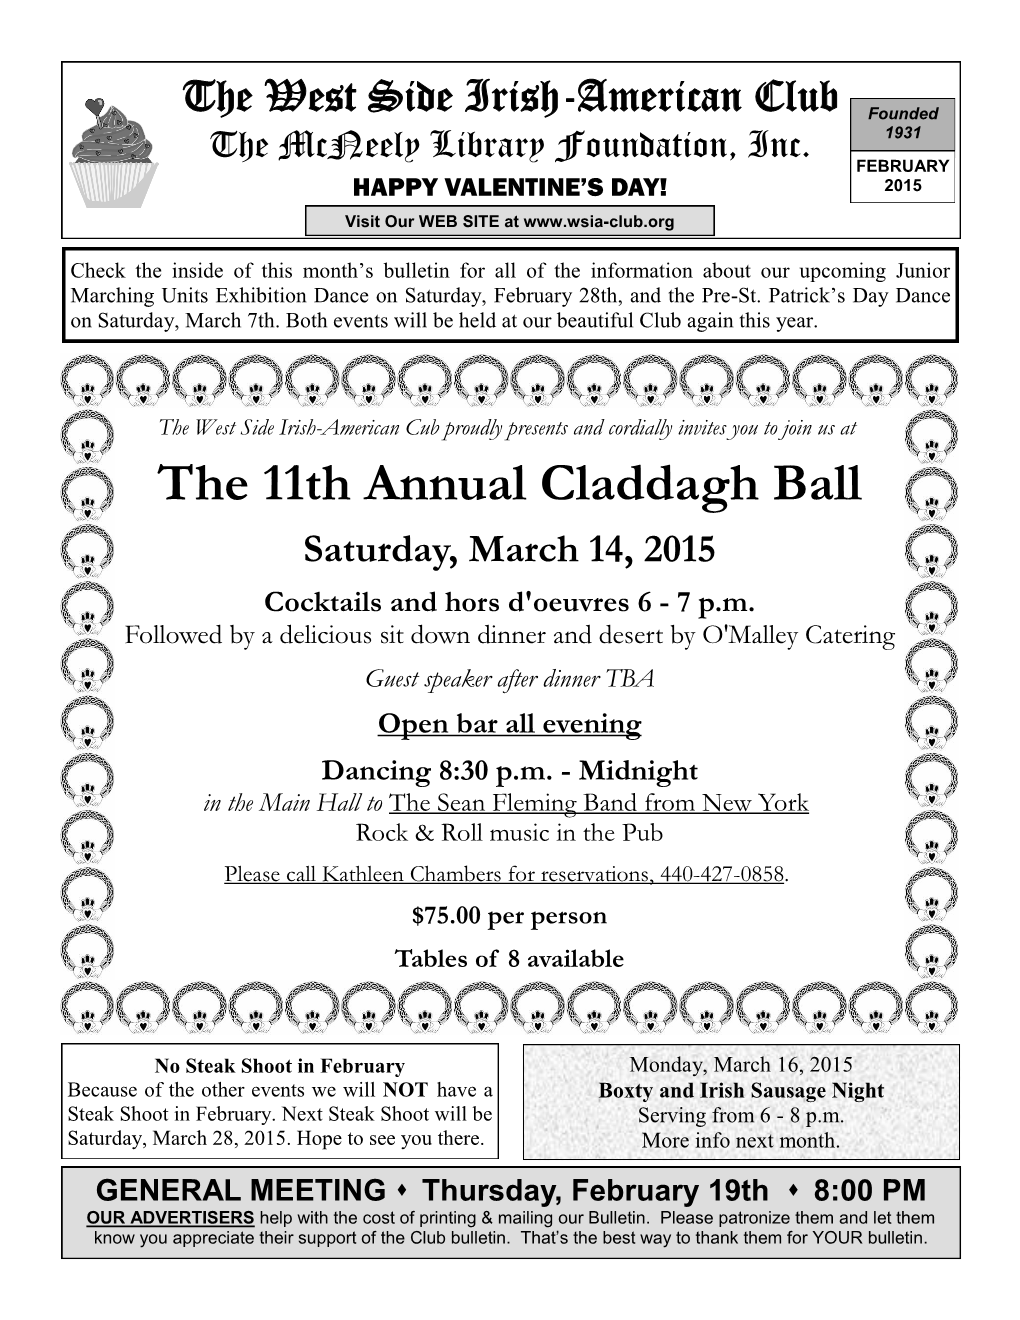 The 11Th Annual Claddagh Ball Saturday, March 14, 2015 Cocktails and Hors D'oeuvres 6 - 7 P.M